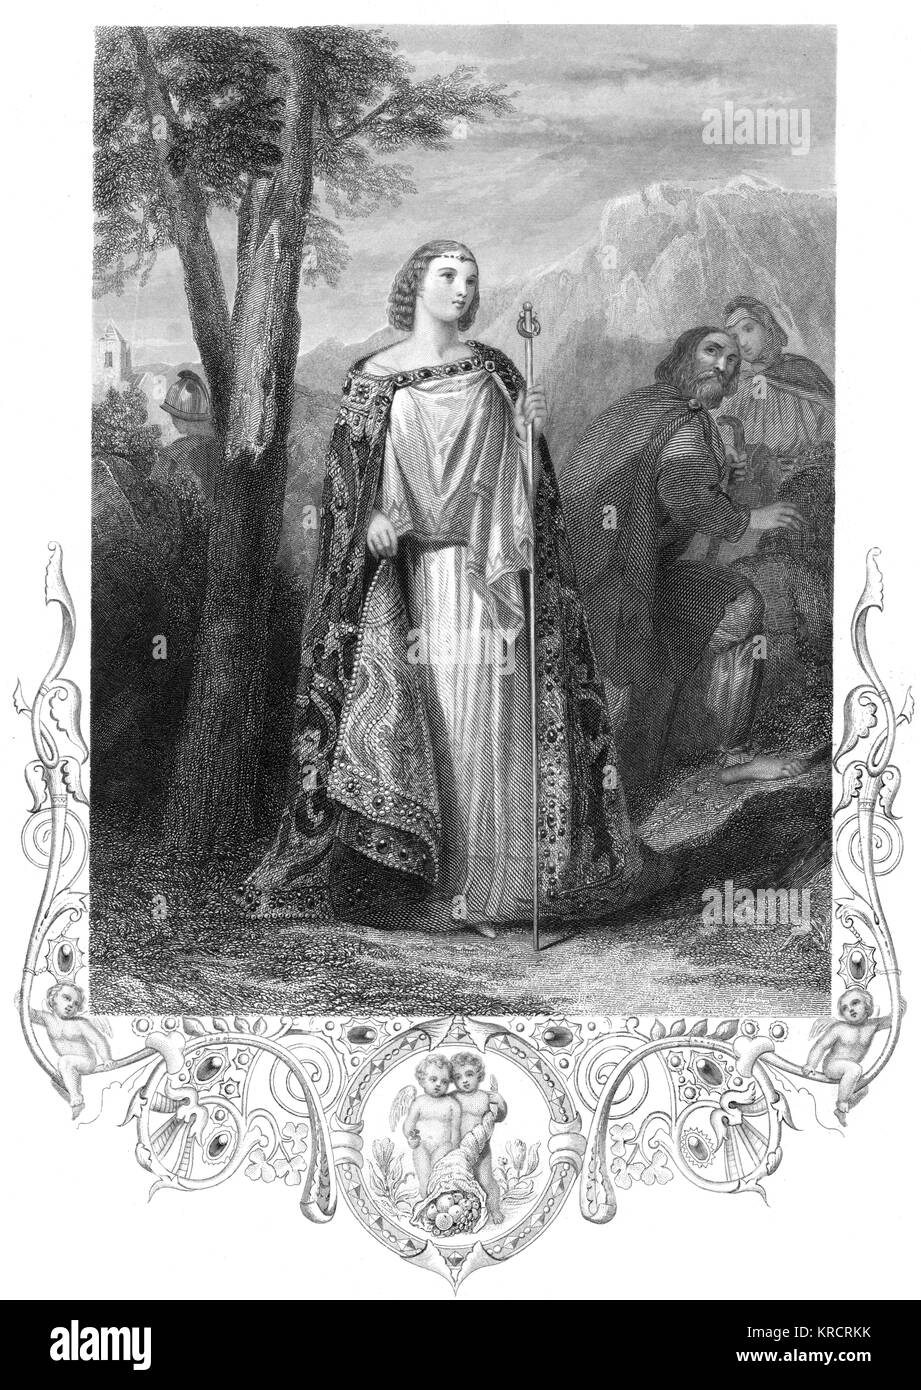 The reign of Brian Boru, when a richly drssed lady could walk from one end of the island to the other without any one seeking to steal her jewelry or anything else Date: 1001 Stock Photo